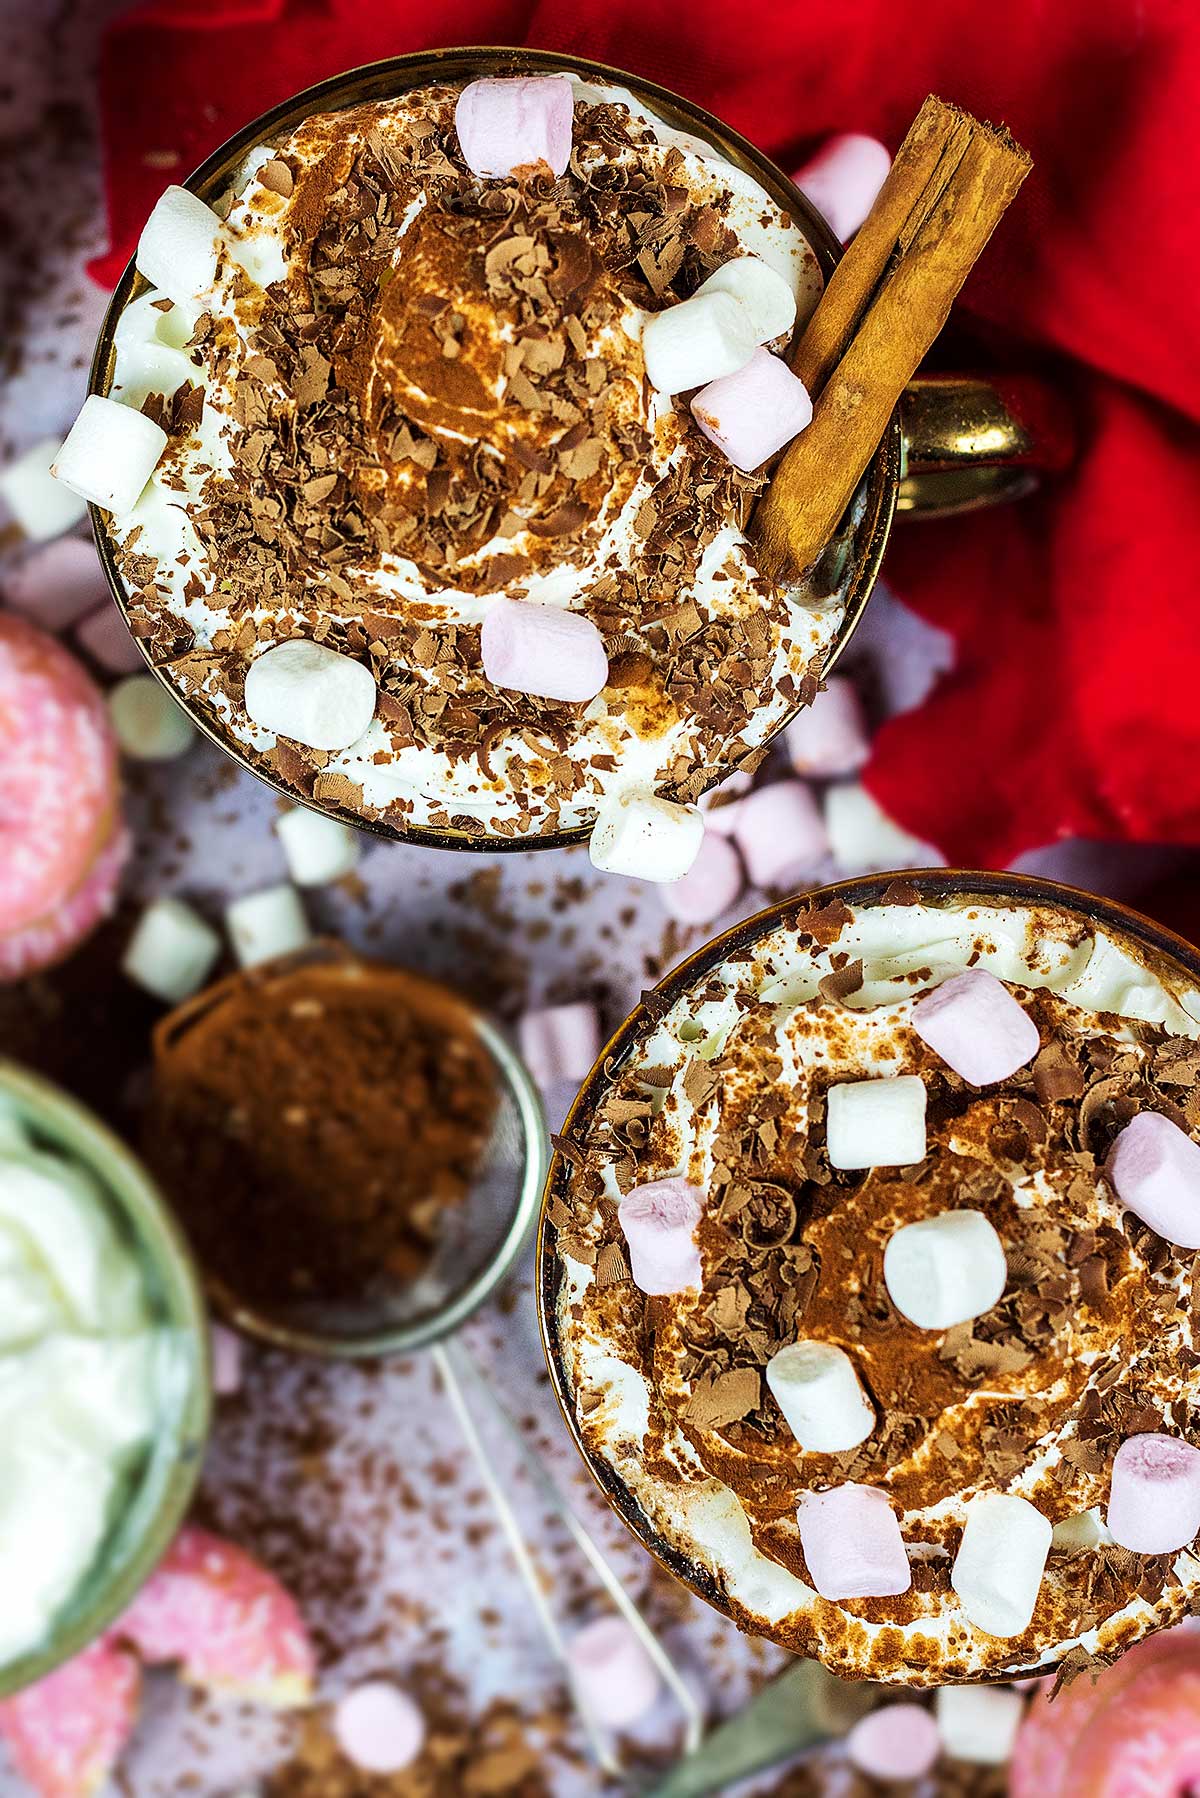 Whipped cream, marshmallows and chocolate shavings on top of two mugs of hot chocolate as viewed from above.